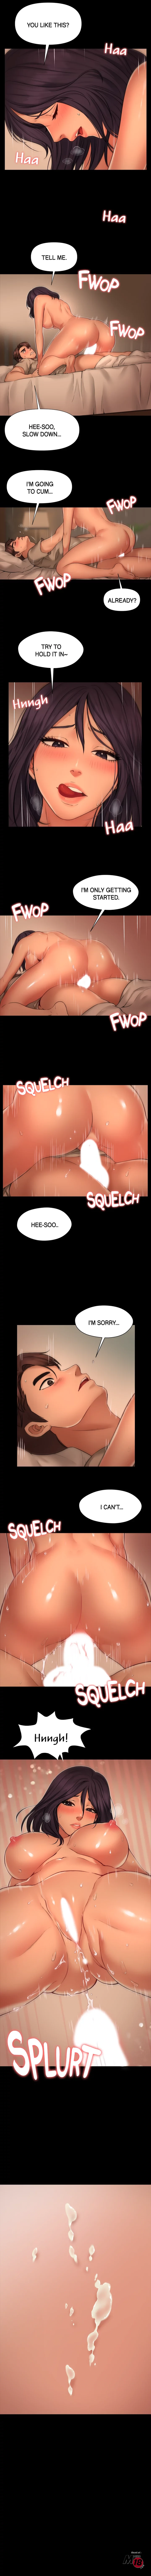 Dreaming : My Friend’s Girl - Chapter 1 Page 5